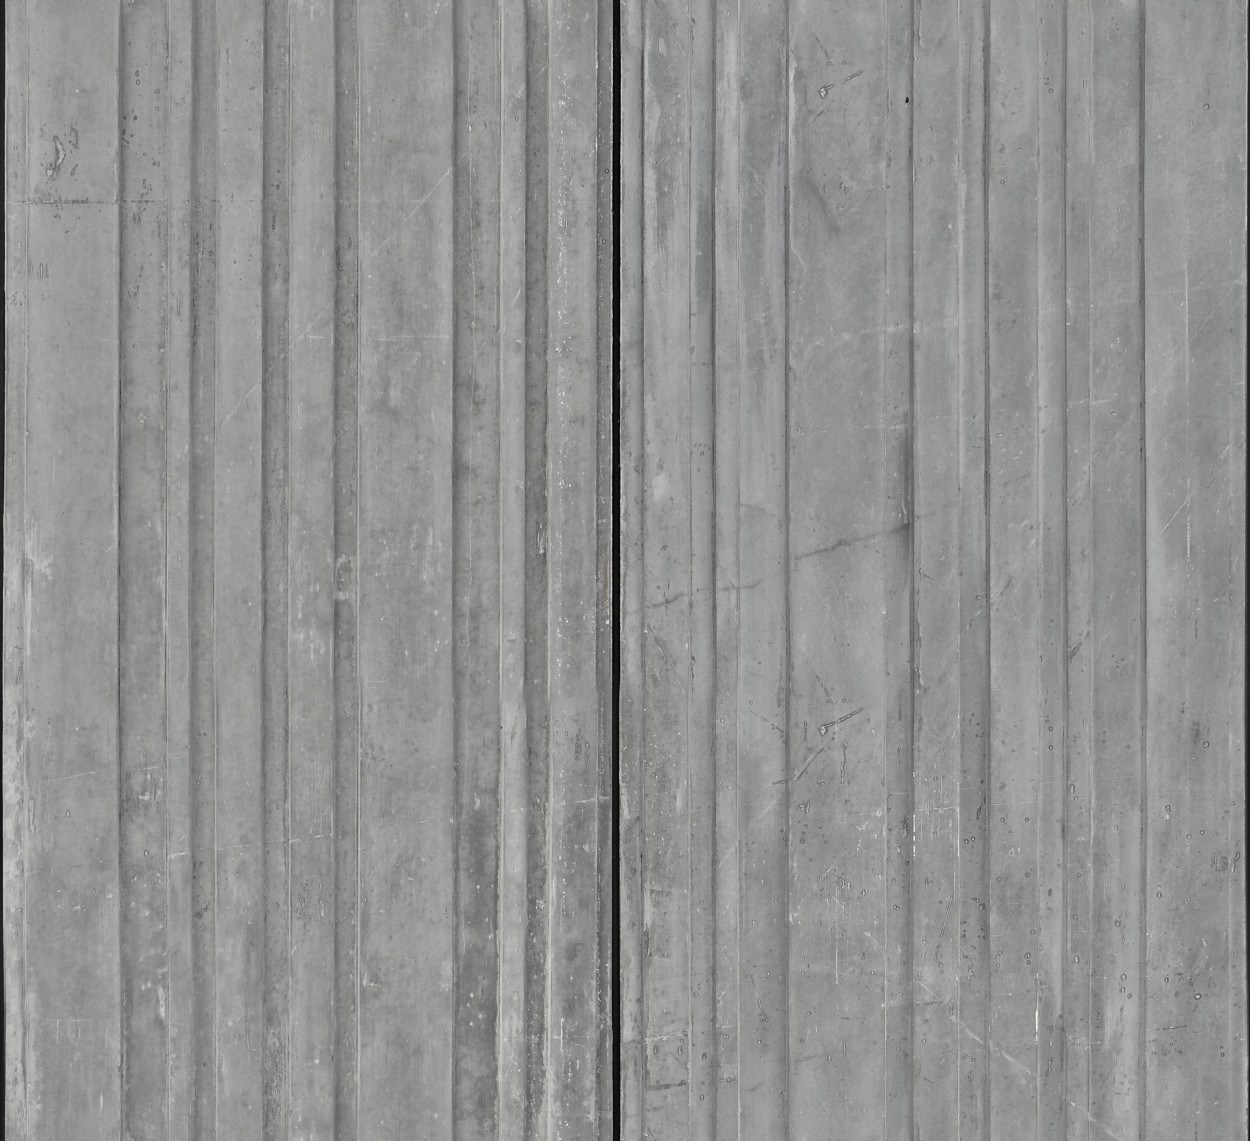 A seamless profiled concrete panles texture for use in architectural drawings and 3D models